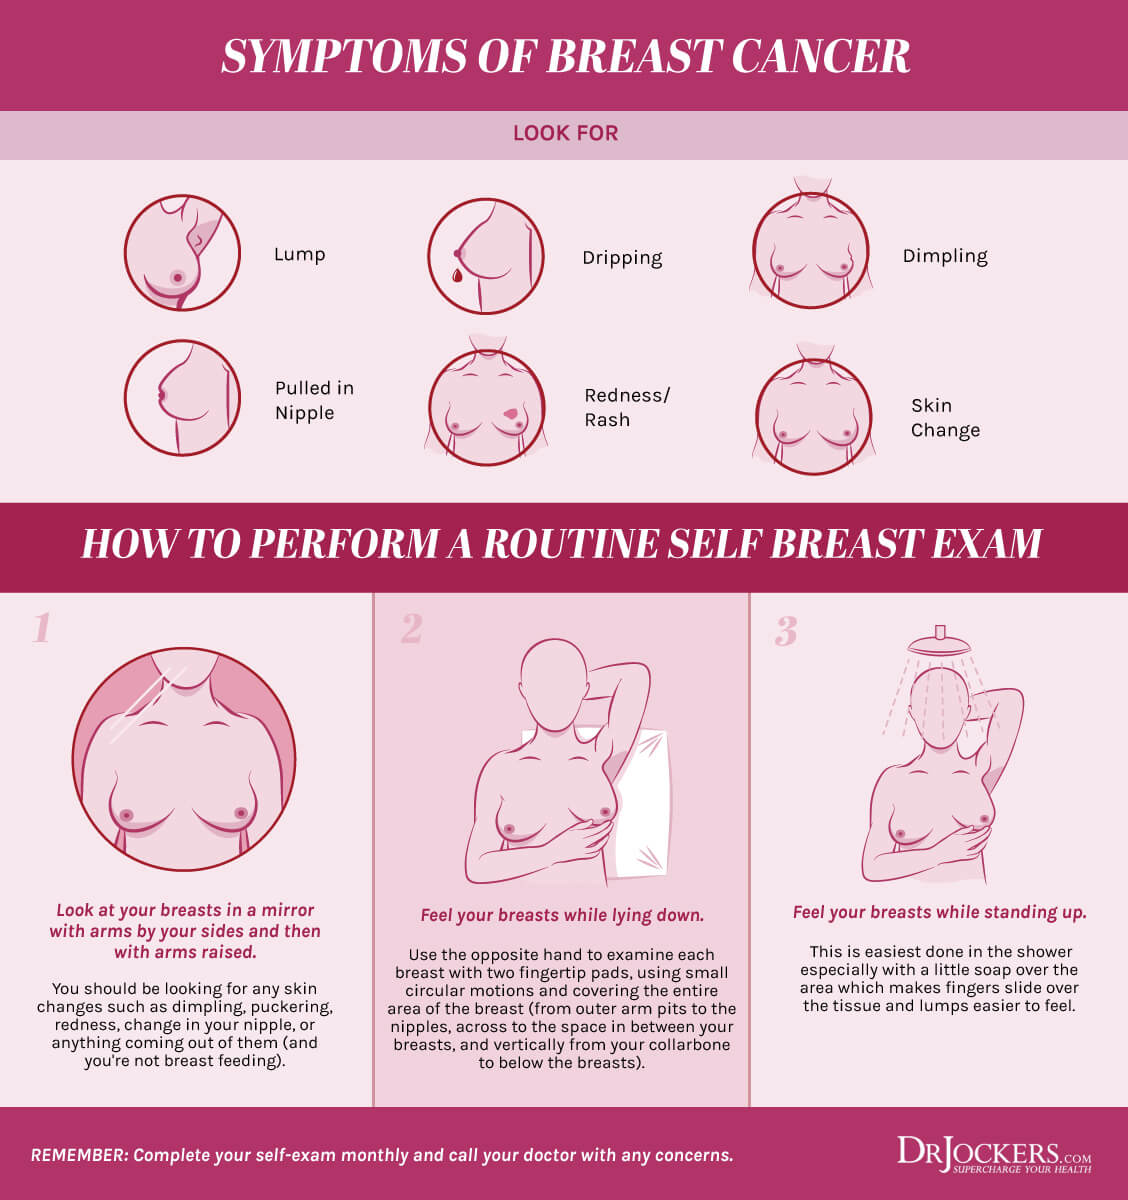 breast cancer, Breast Cancer:  Causes, Symptoms and Natural Support Strategies